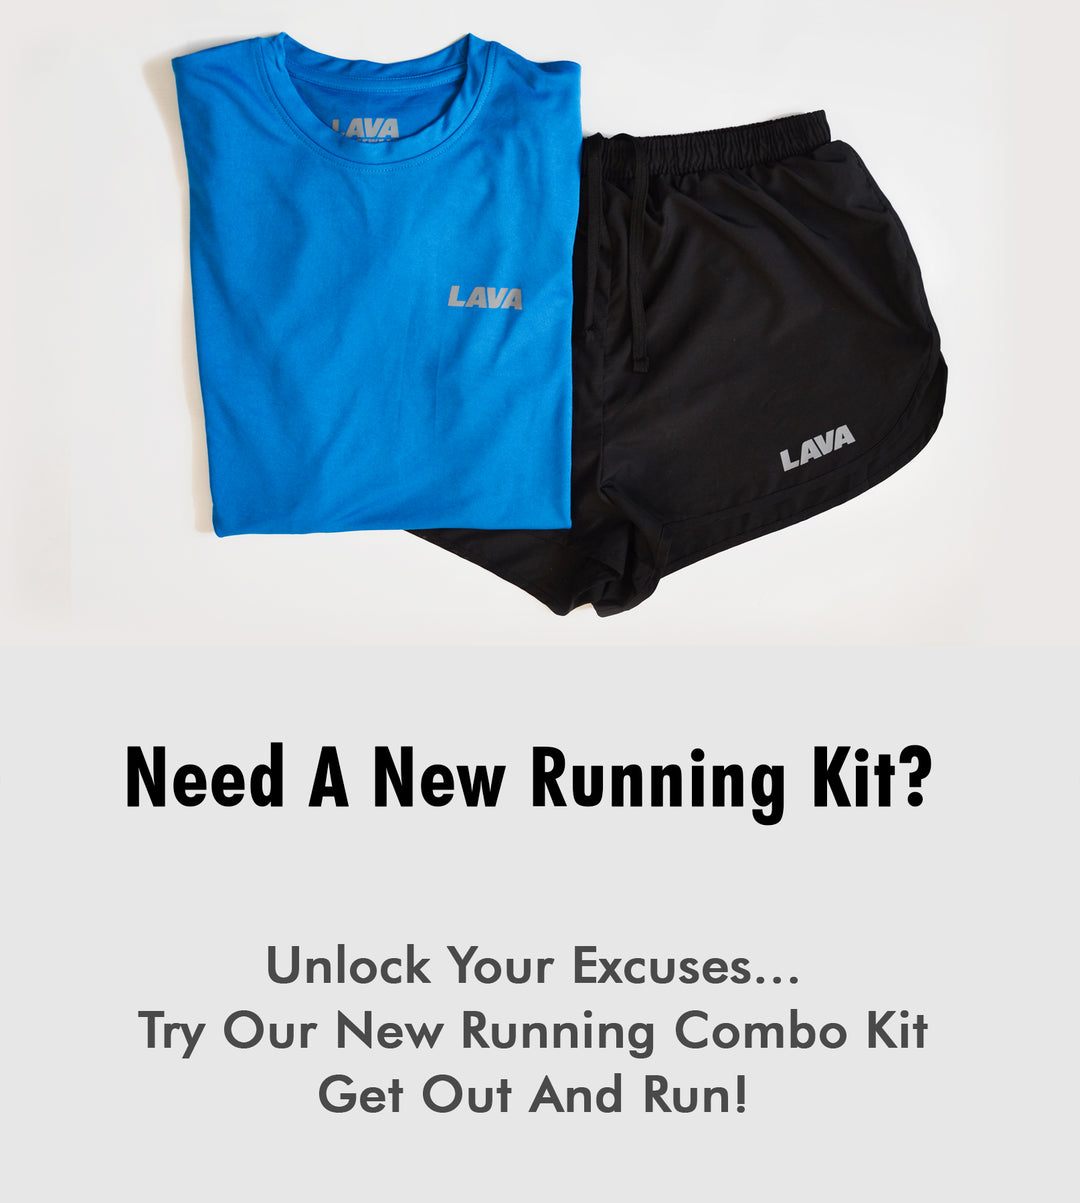 Combine Your Training Kit, Save Now!